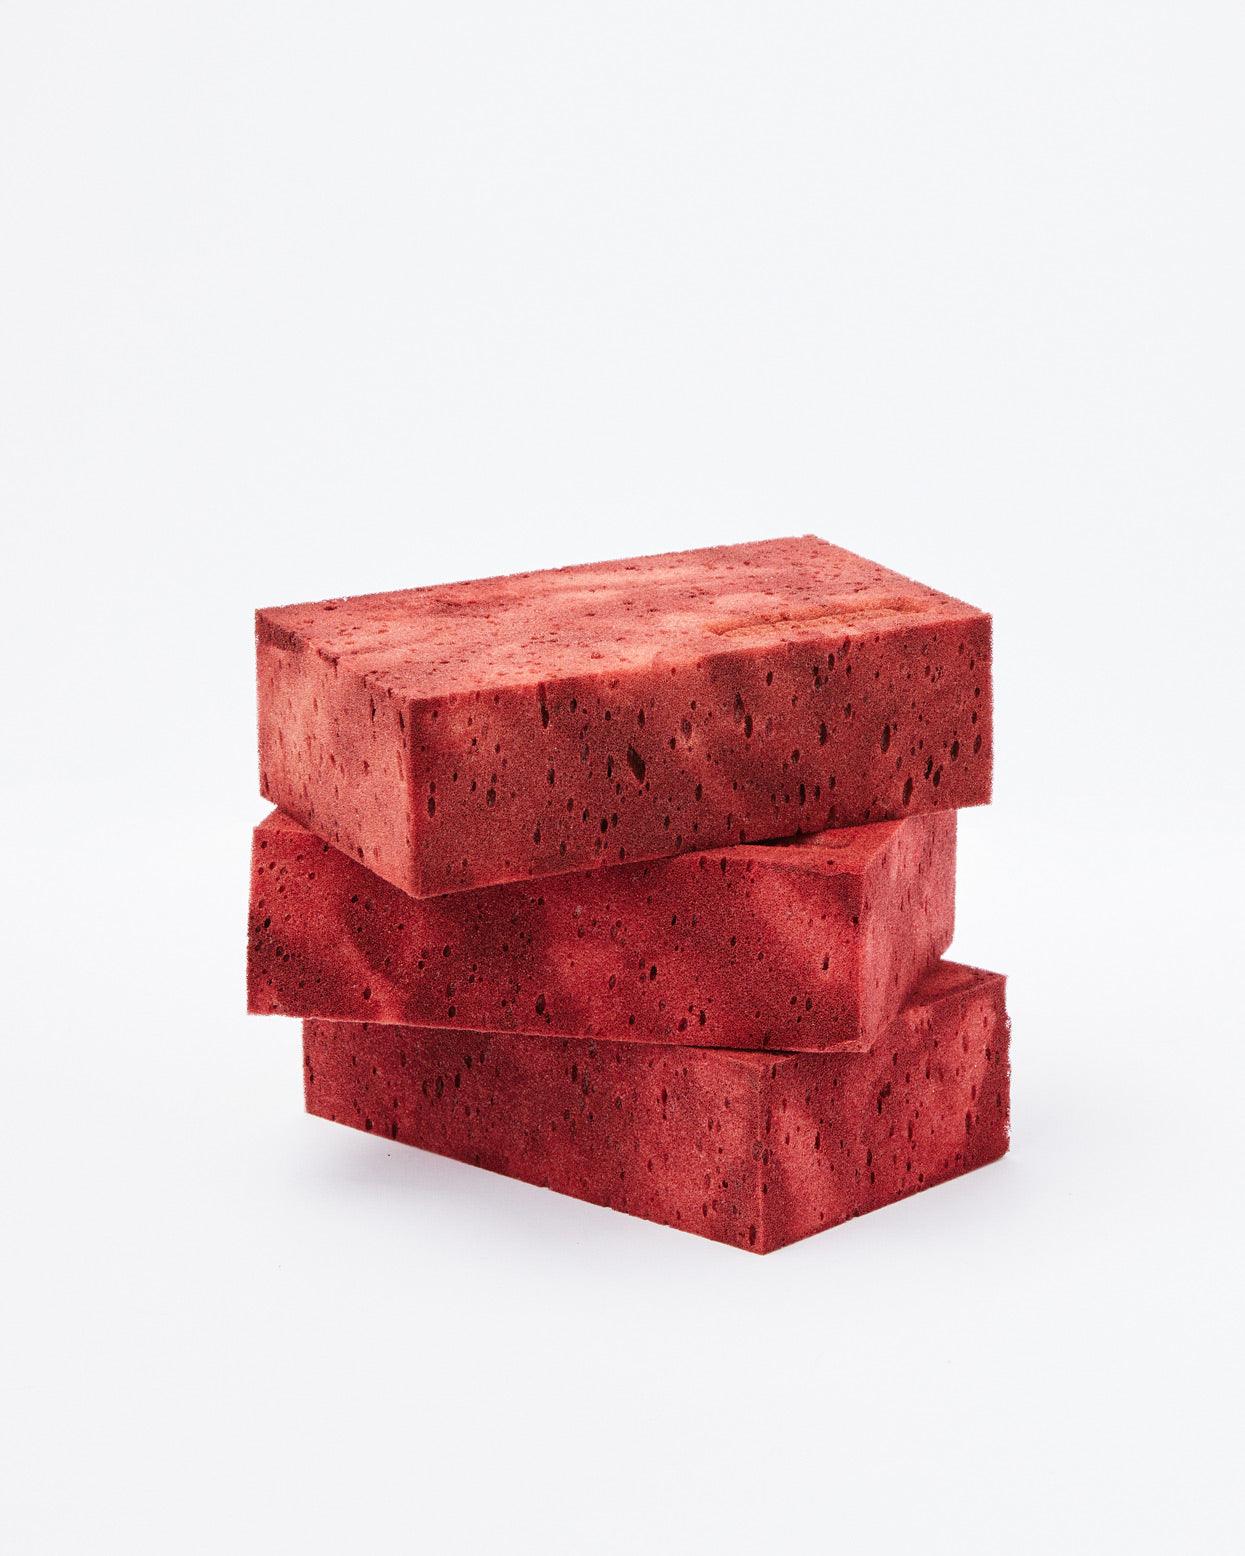 Three red bricks in vertical position on a white background